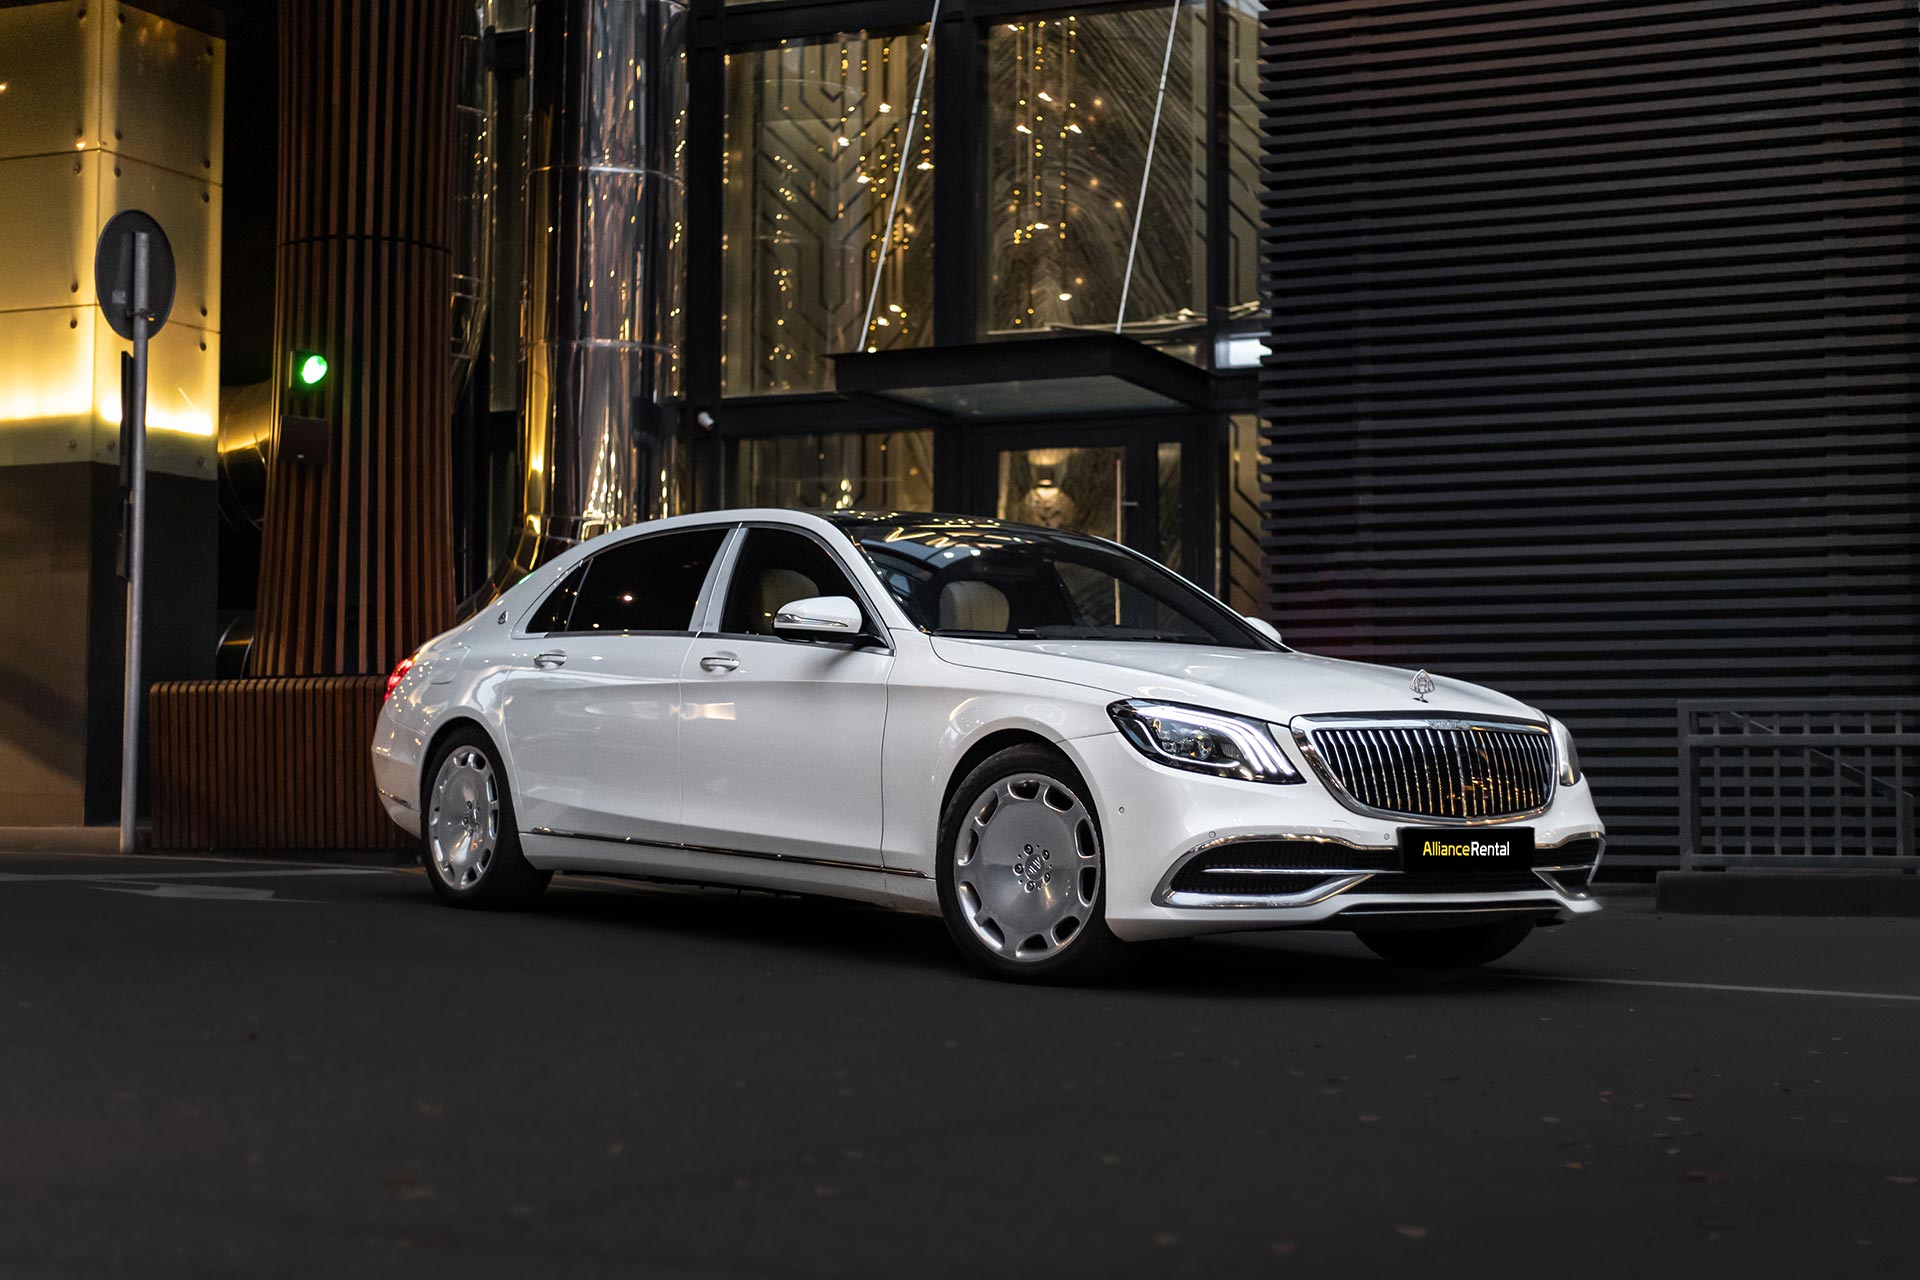 Merсedes Maybach S-class white